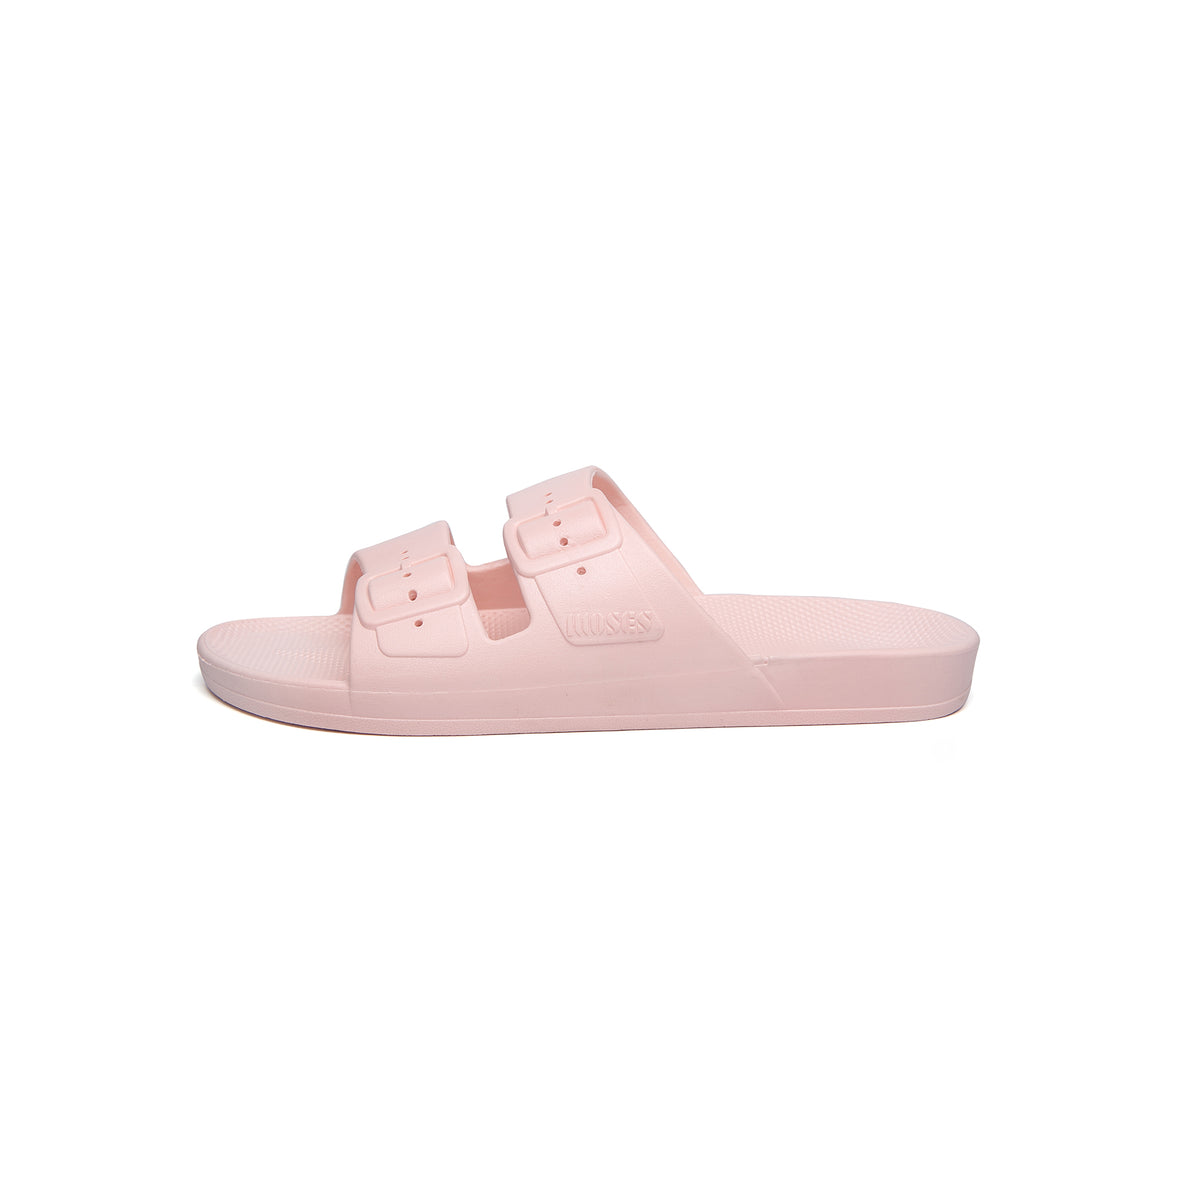 Parallel Culture Shoes and Fashion Online SLIDES FREEDOM MOSES FREEDOM MOSES SOLIDS ROSE